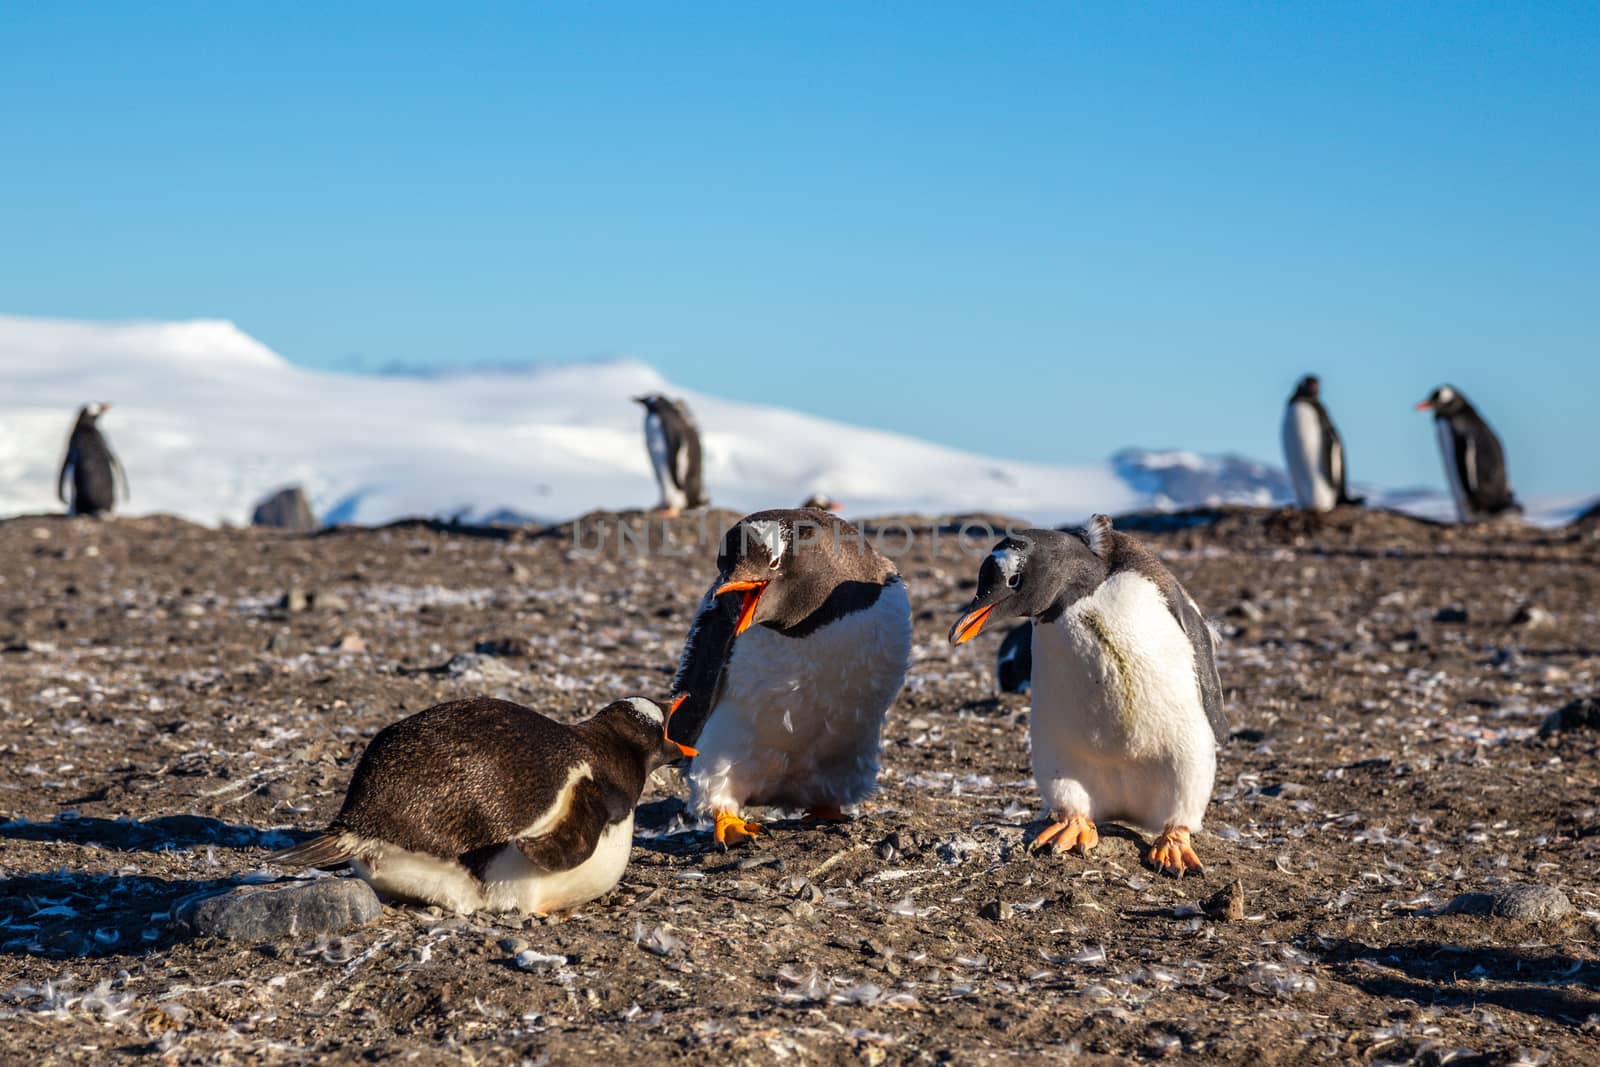 Gentoo penguin family conflict at the Barrientos Island, Antarctic